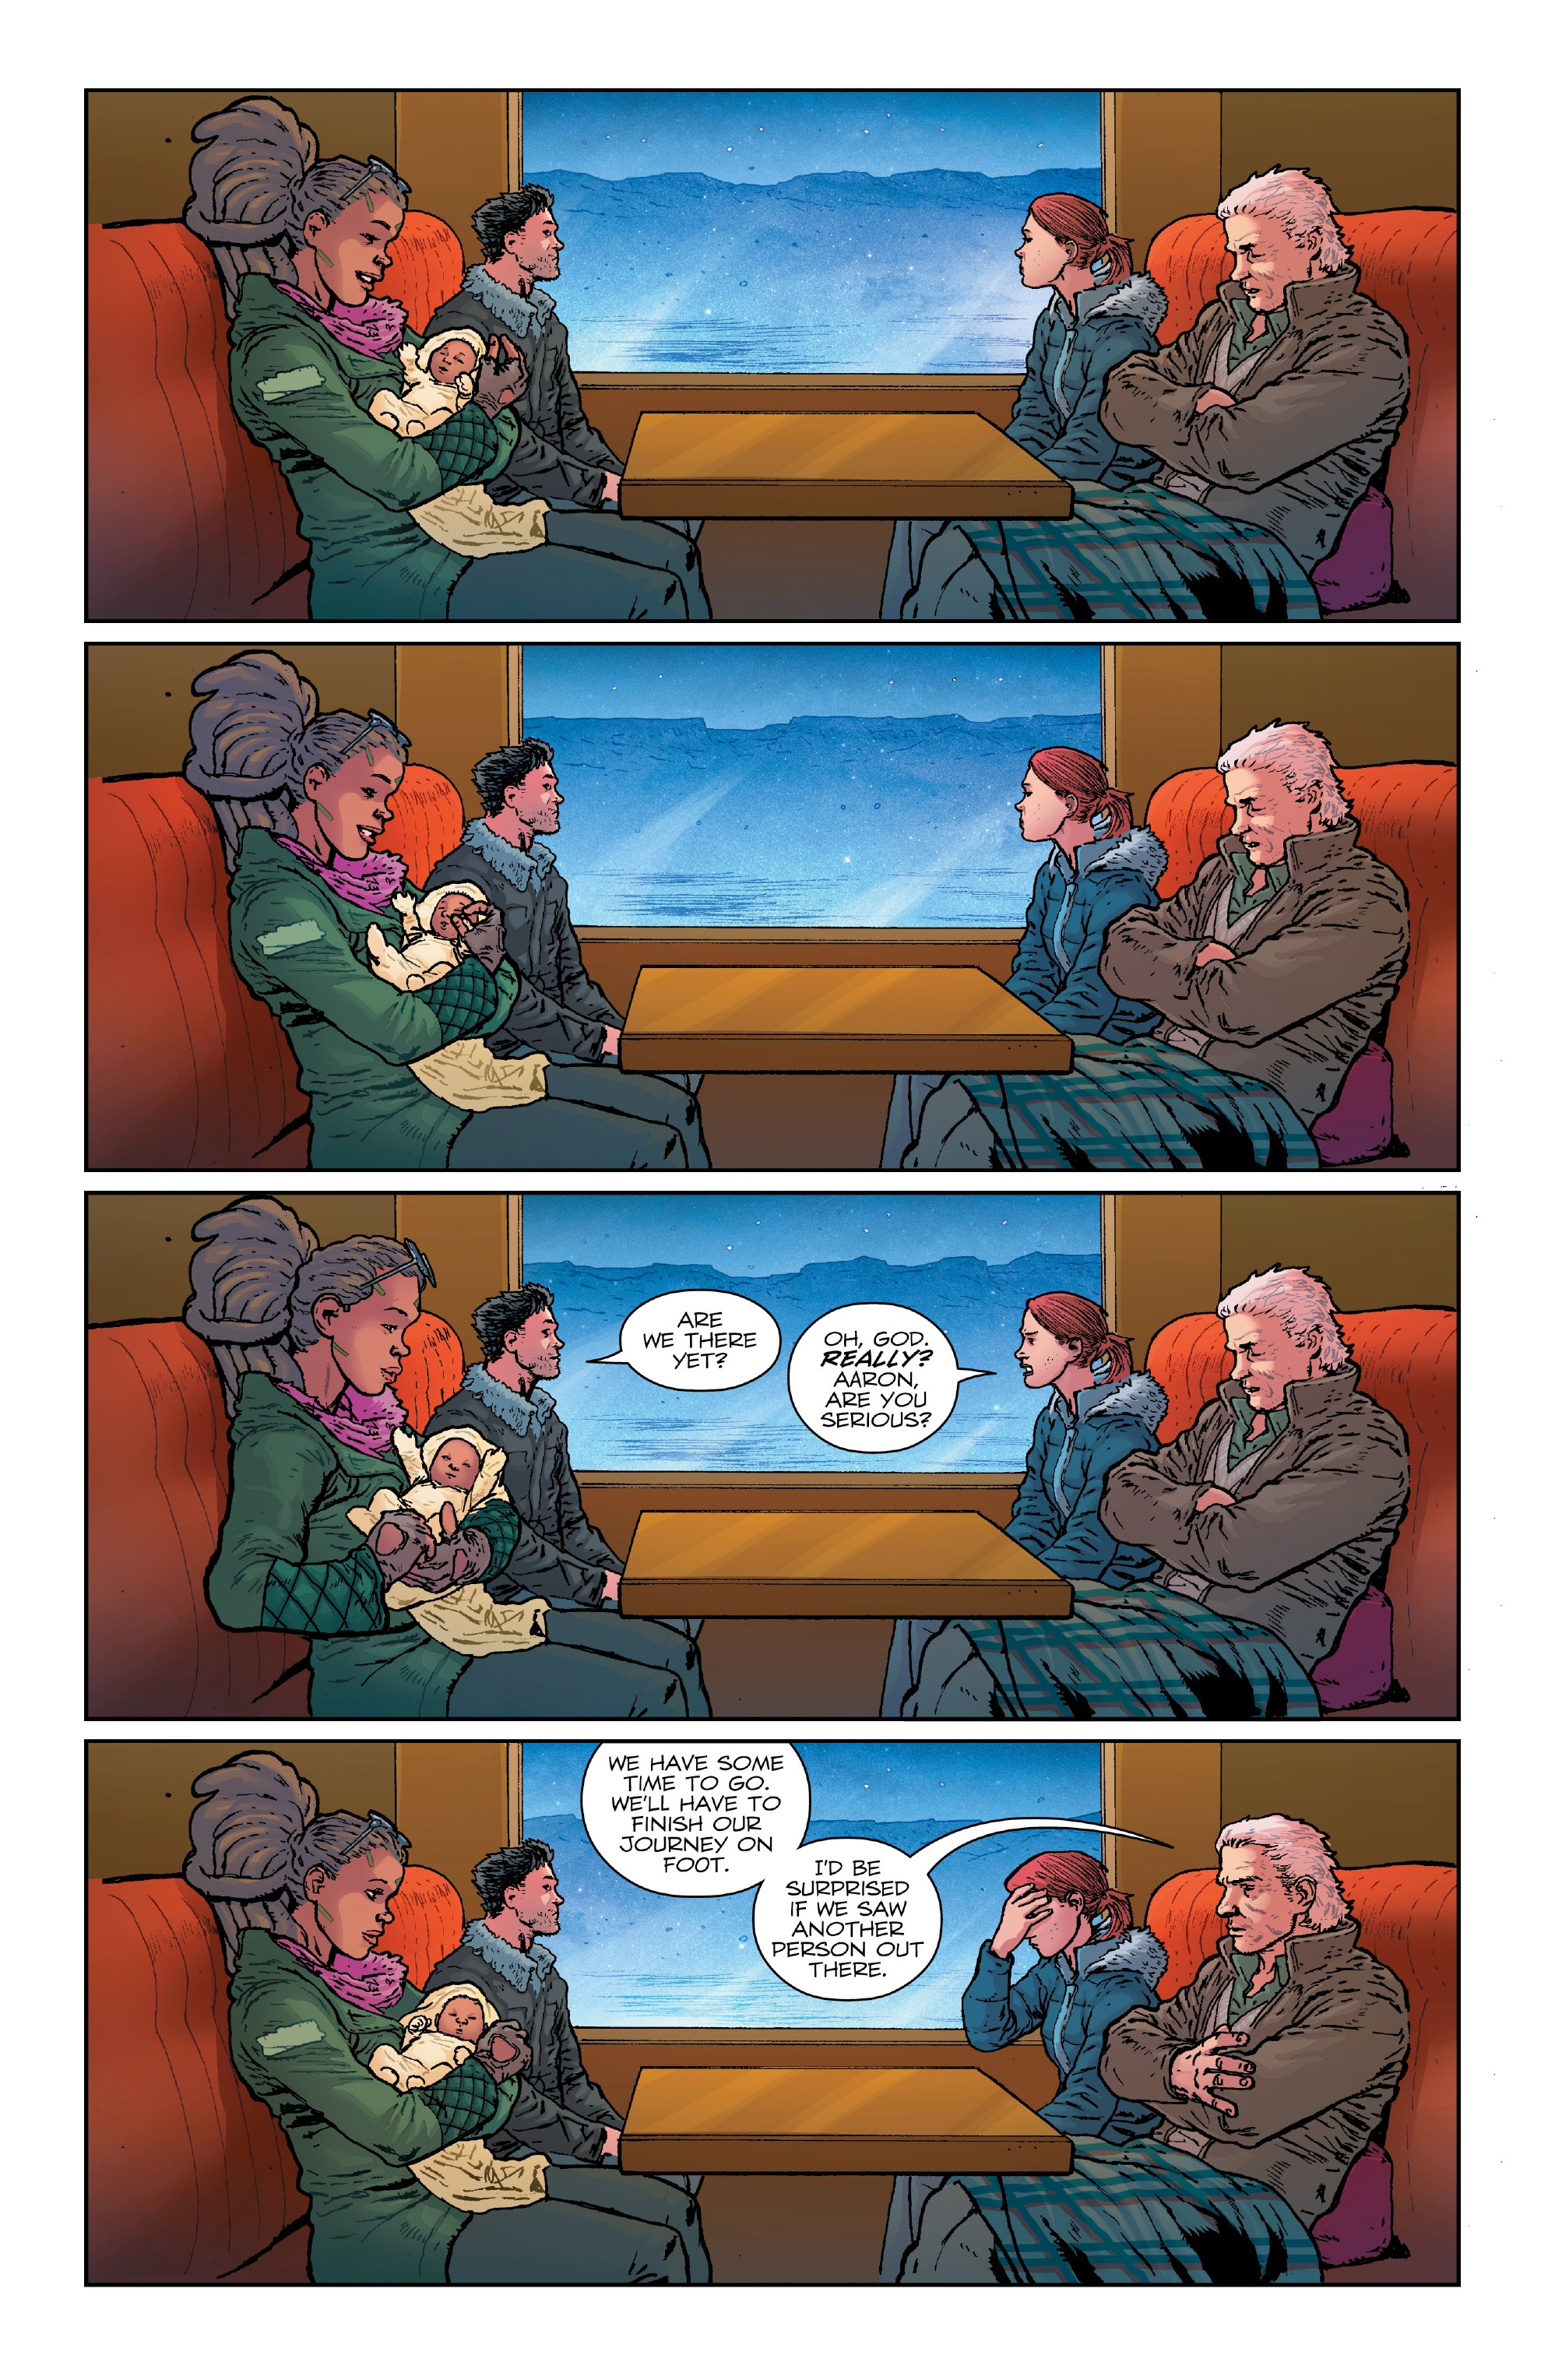 Birthright (2014-): Chapter 27 - Page 3